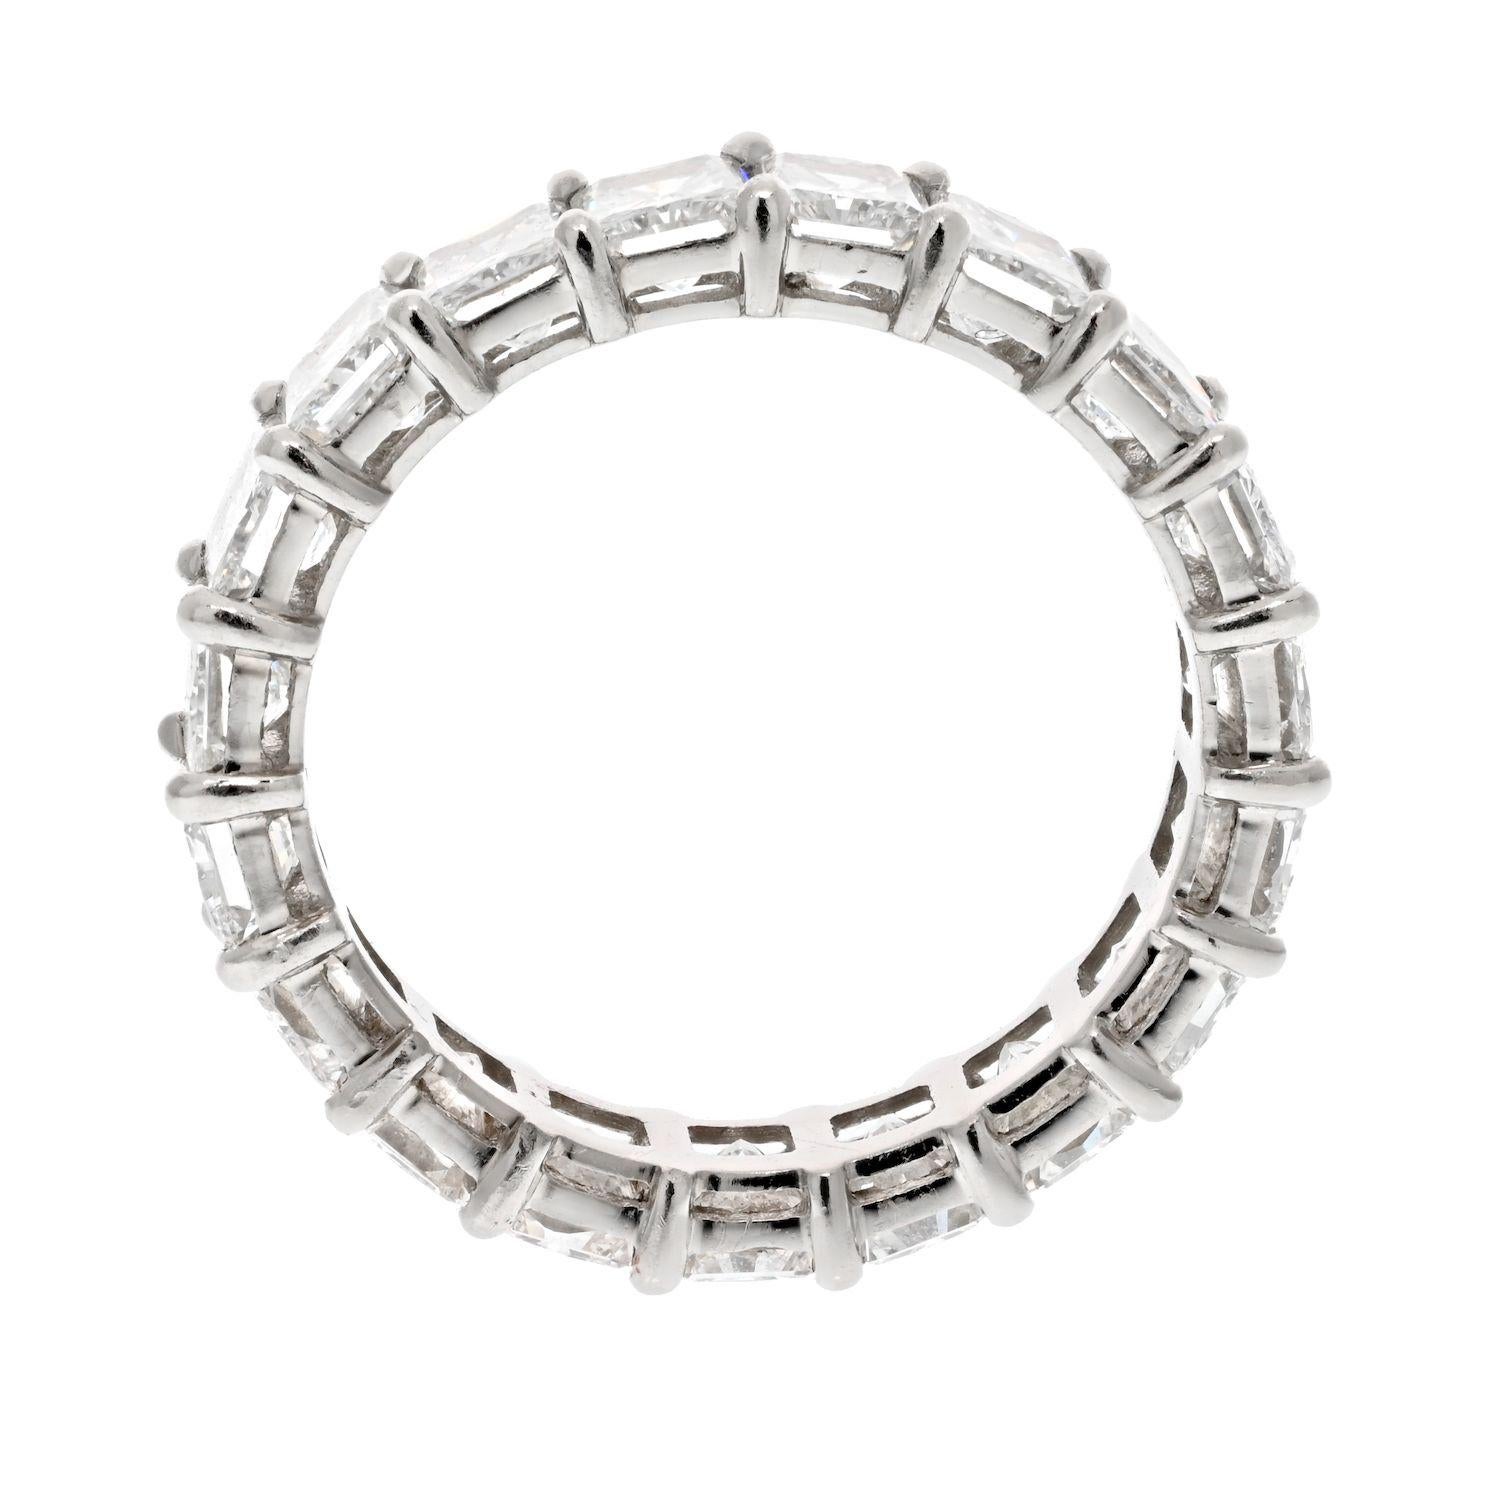 Platinum 6.50 Carats Radiant Cut Diamond Eternity Band.
This is a beautiful radiant diamond eternity band crafted in Platinum mounted with 19 diamonds of 6.50cttw. Radiant cut diamonds are set with shared claw prongs and are mounted rather low so